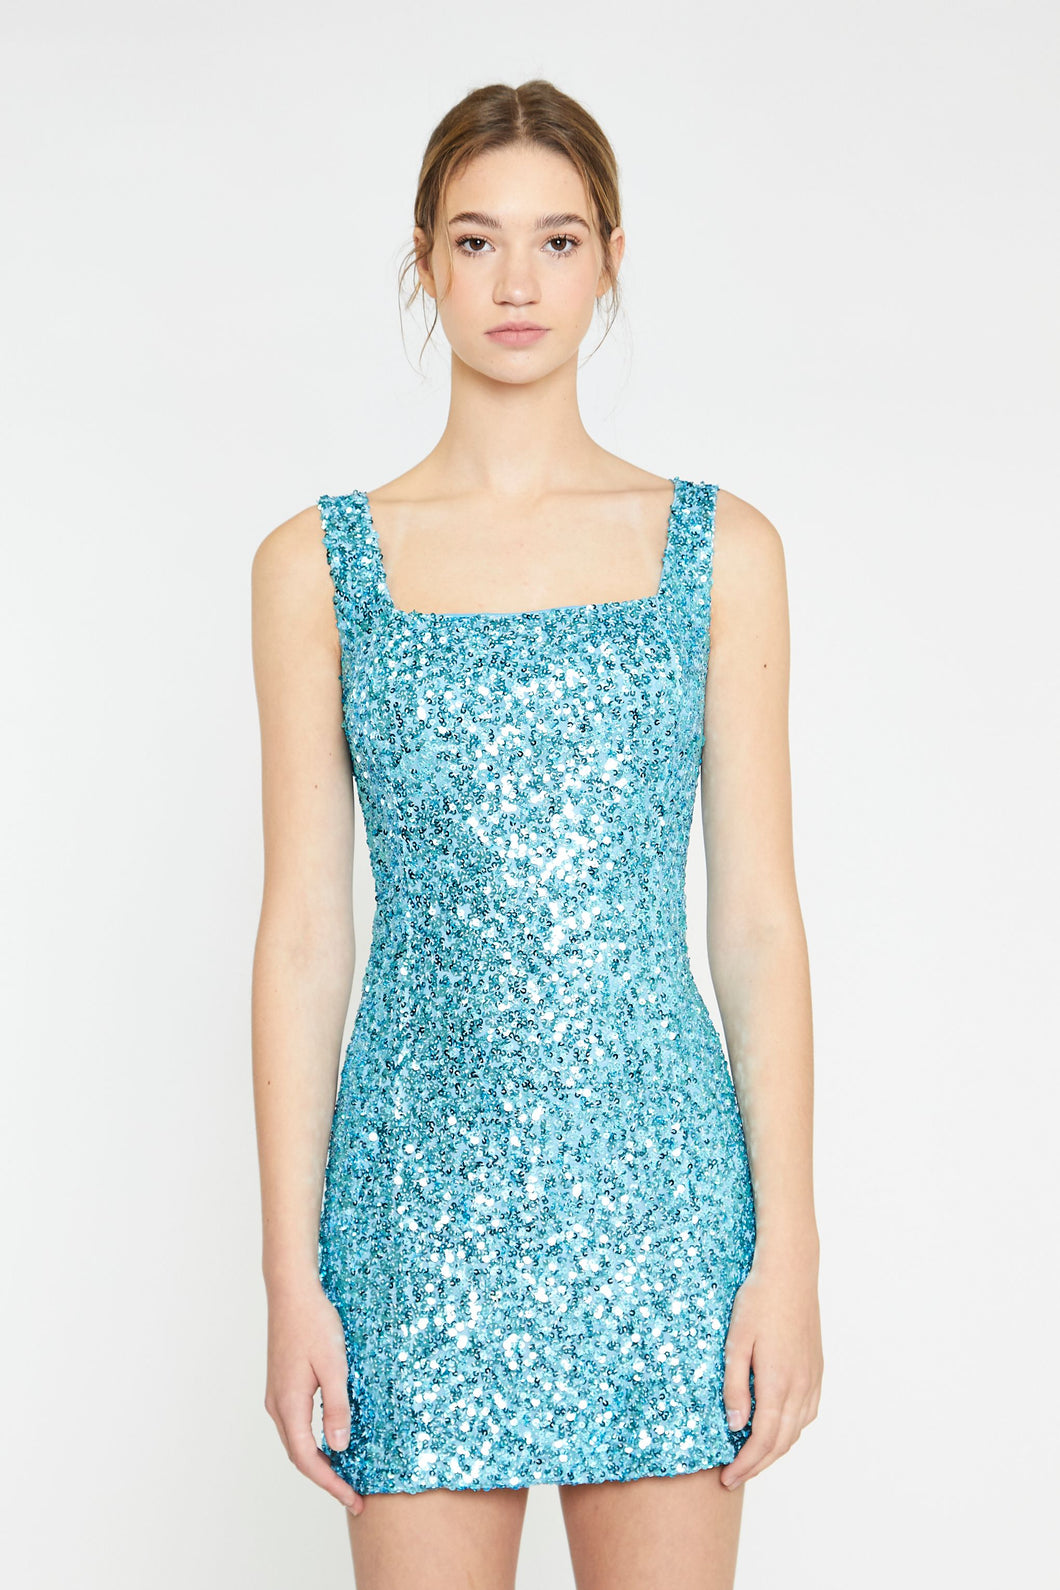 Our glamorous Aqua Blue Sequin Mini Dress adds the perfect pop of color to your event. This statement dress is sophisticated, gorgeous and well made. Fully lined, sleeveless with a zipper closure in the back and some stretch in the fabric. Wear our Aqua Blue Sequin Mini Dress with heels or boots whenever you want to shine.